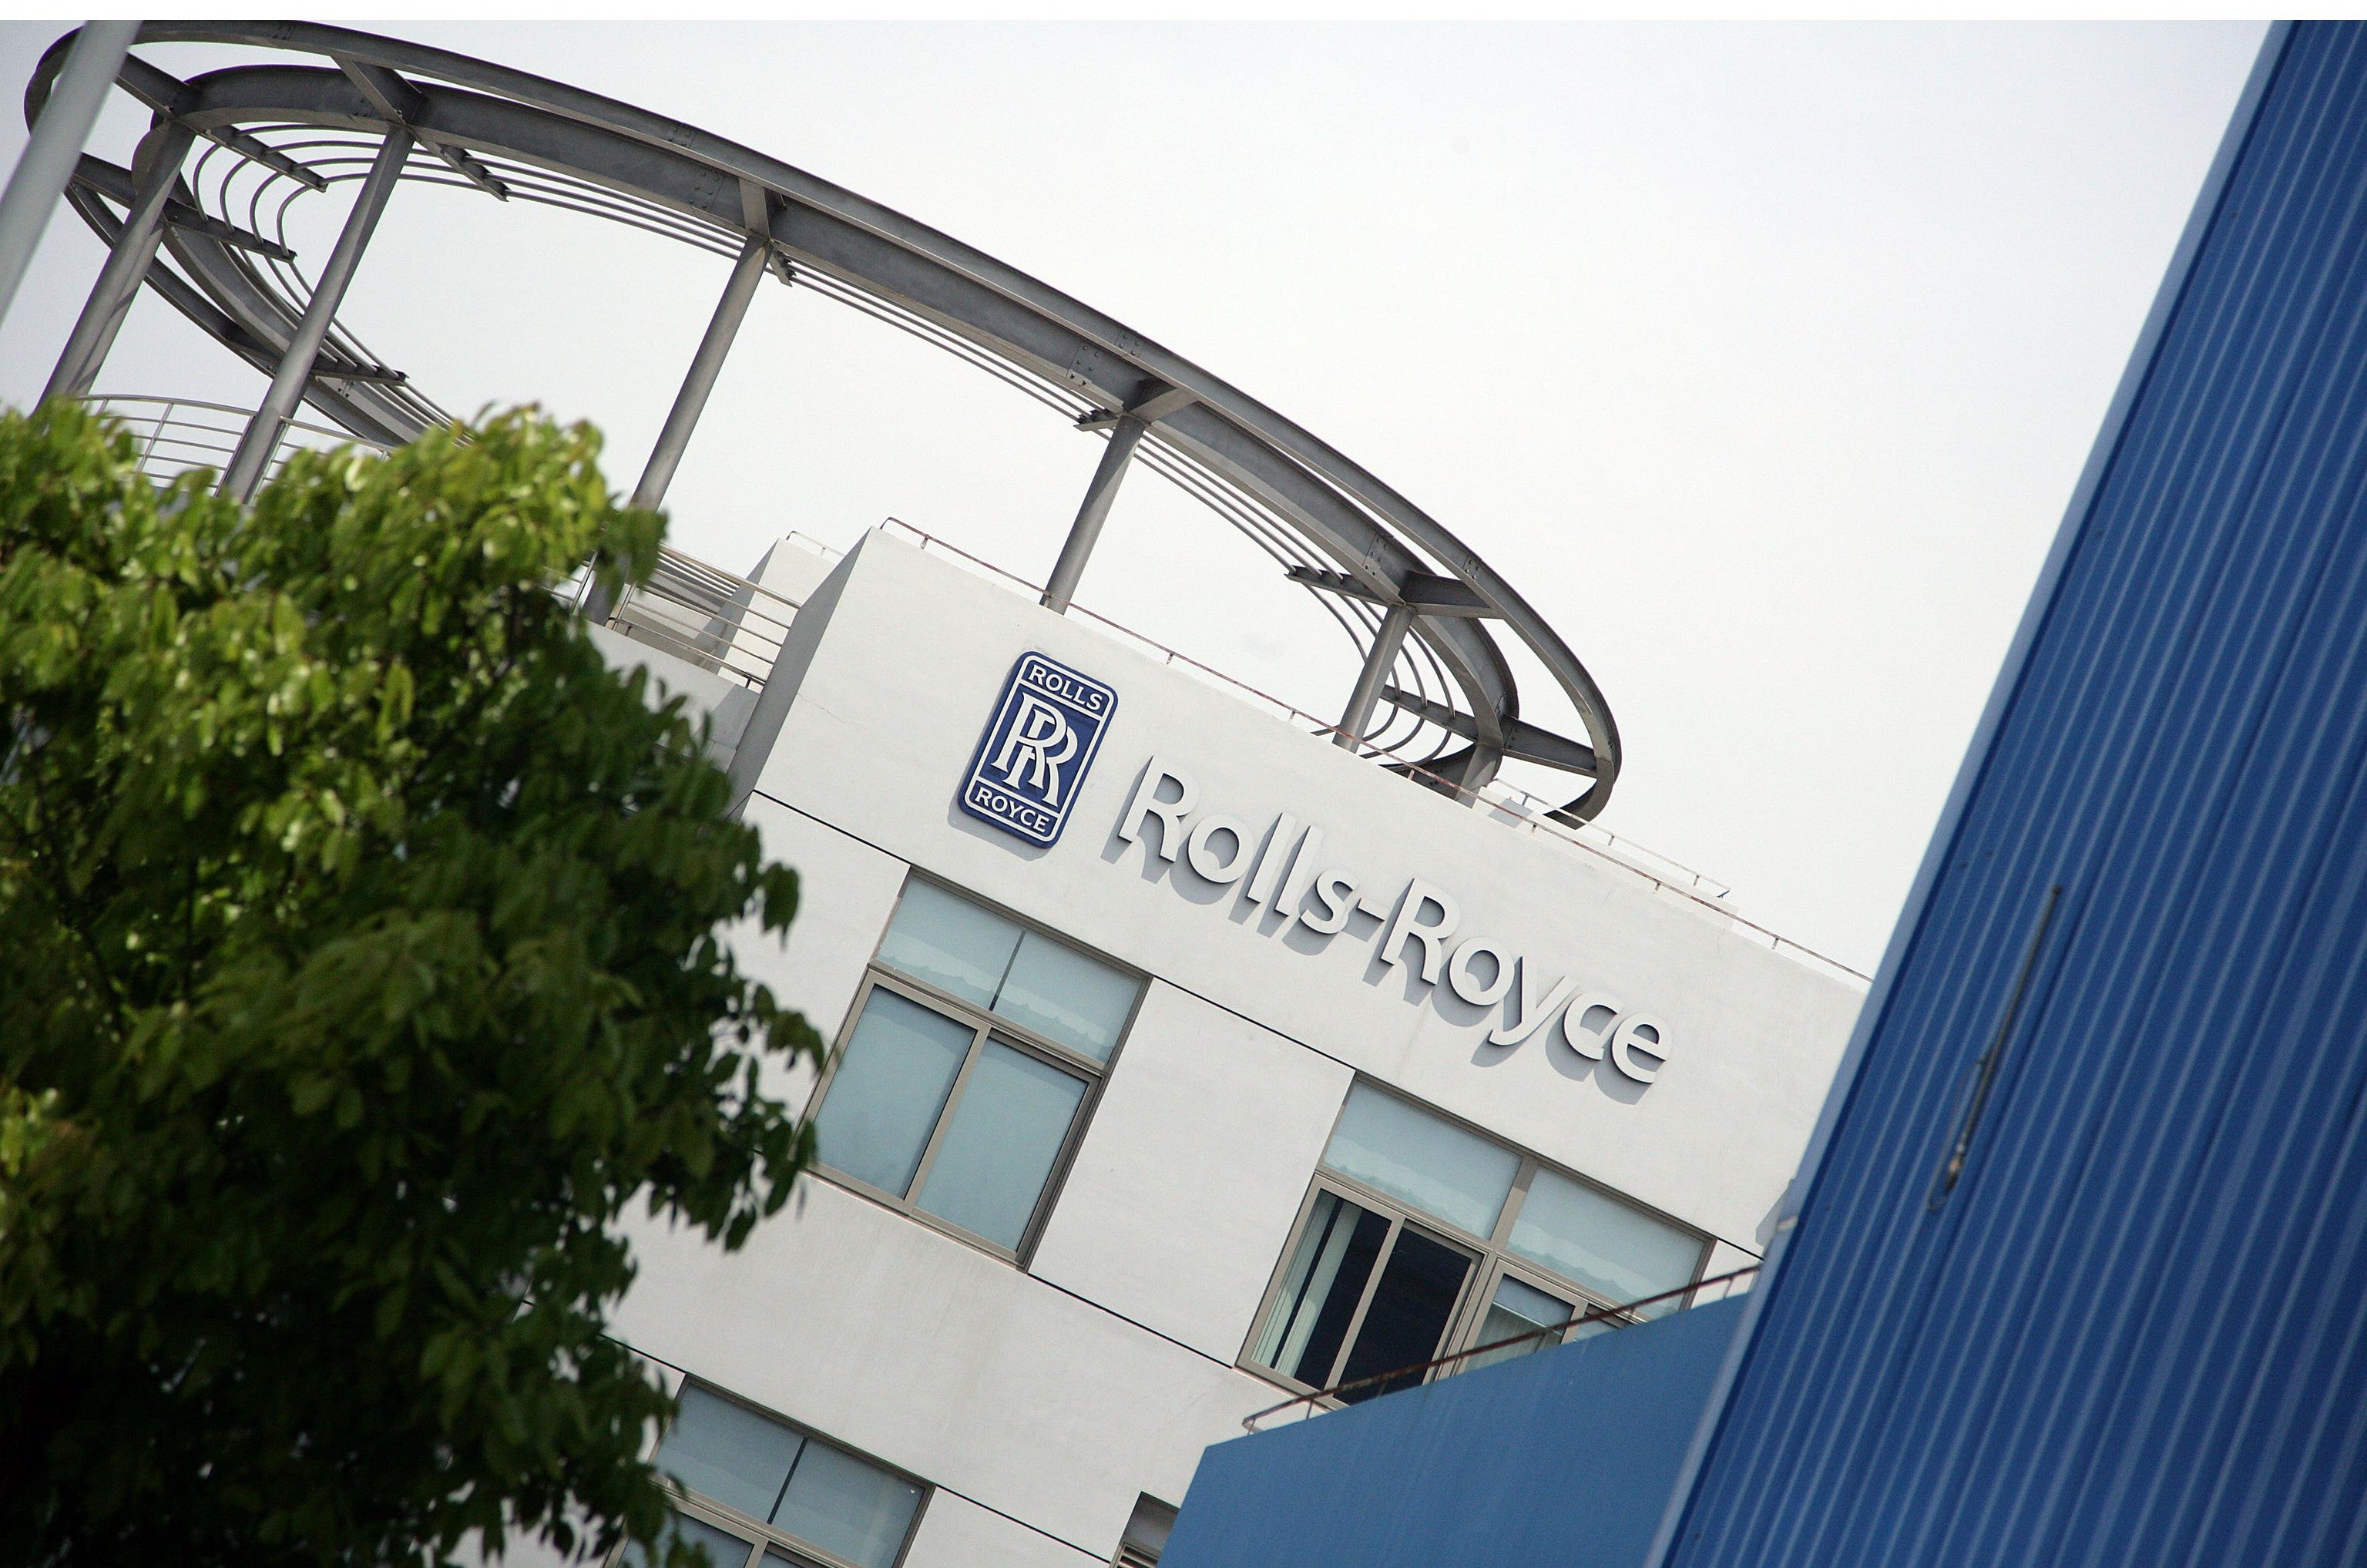 Rolls-Royce has secured £85 million from Qatar for its operation building small nuclear reactors (Rolls-Royce/PA)